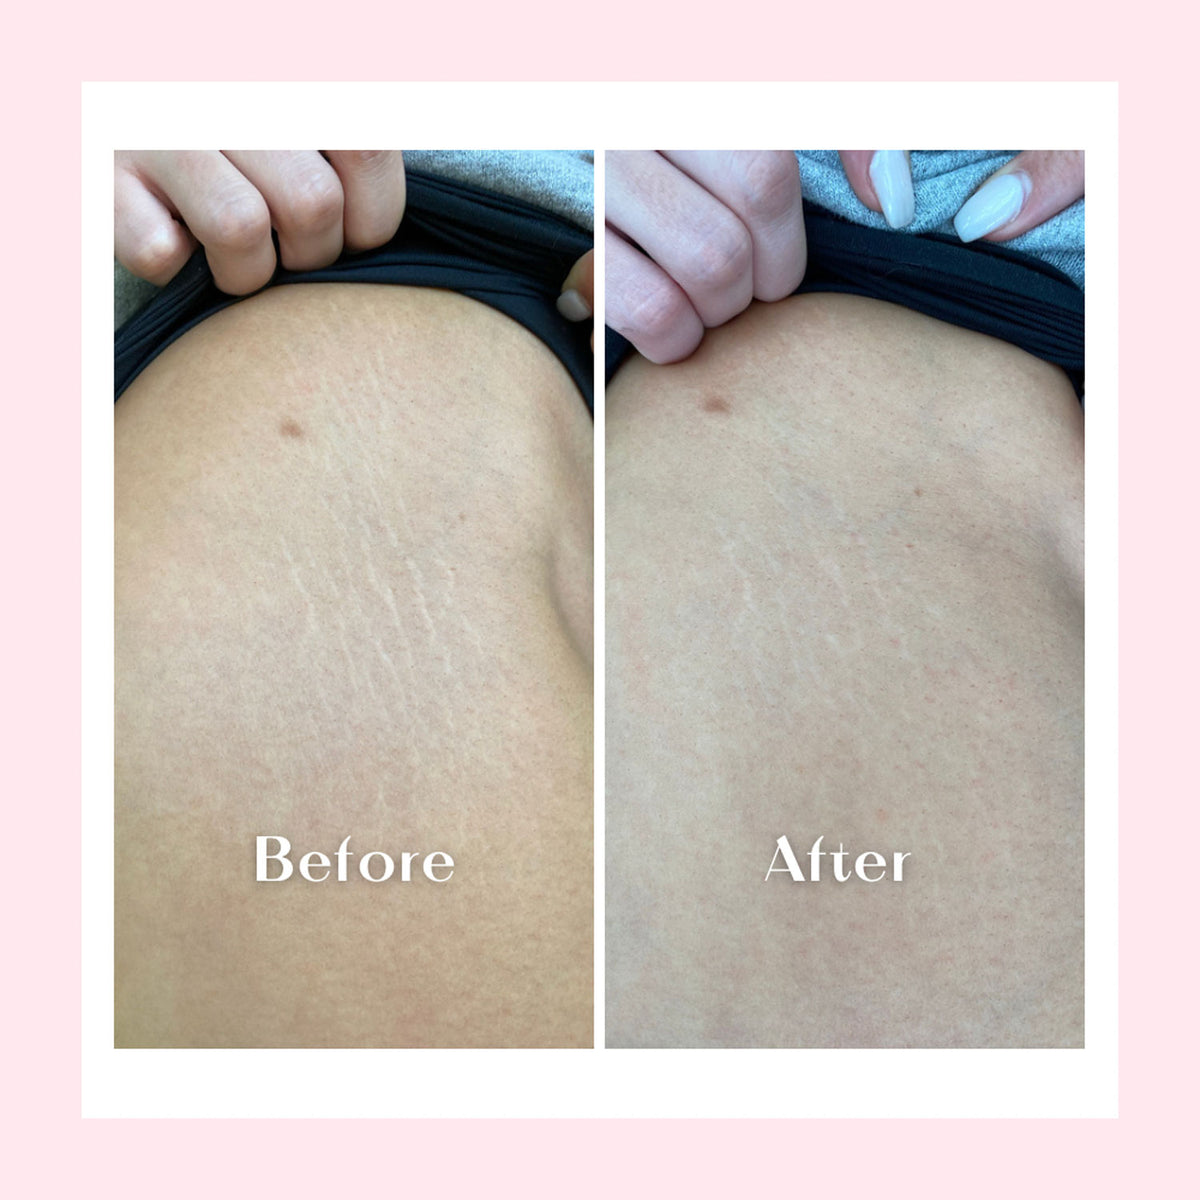 Before and After - Nakery Beauty No More Stripes Stretched Skin Oil